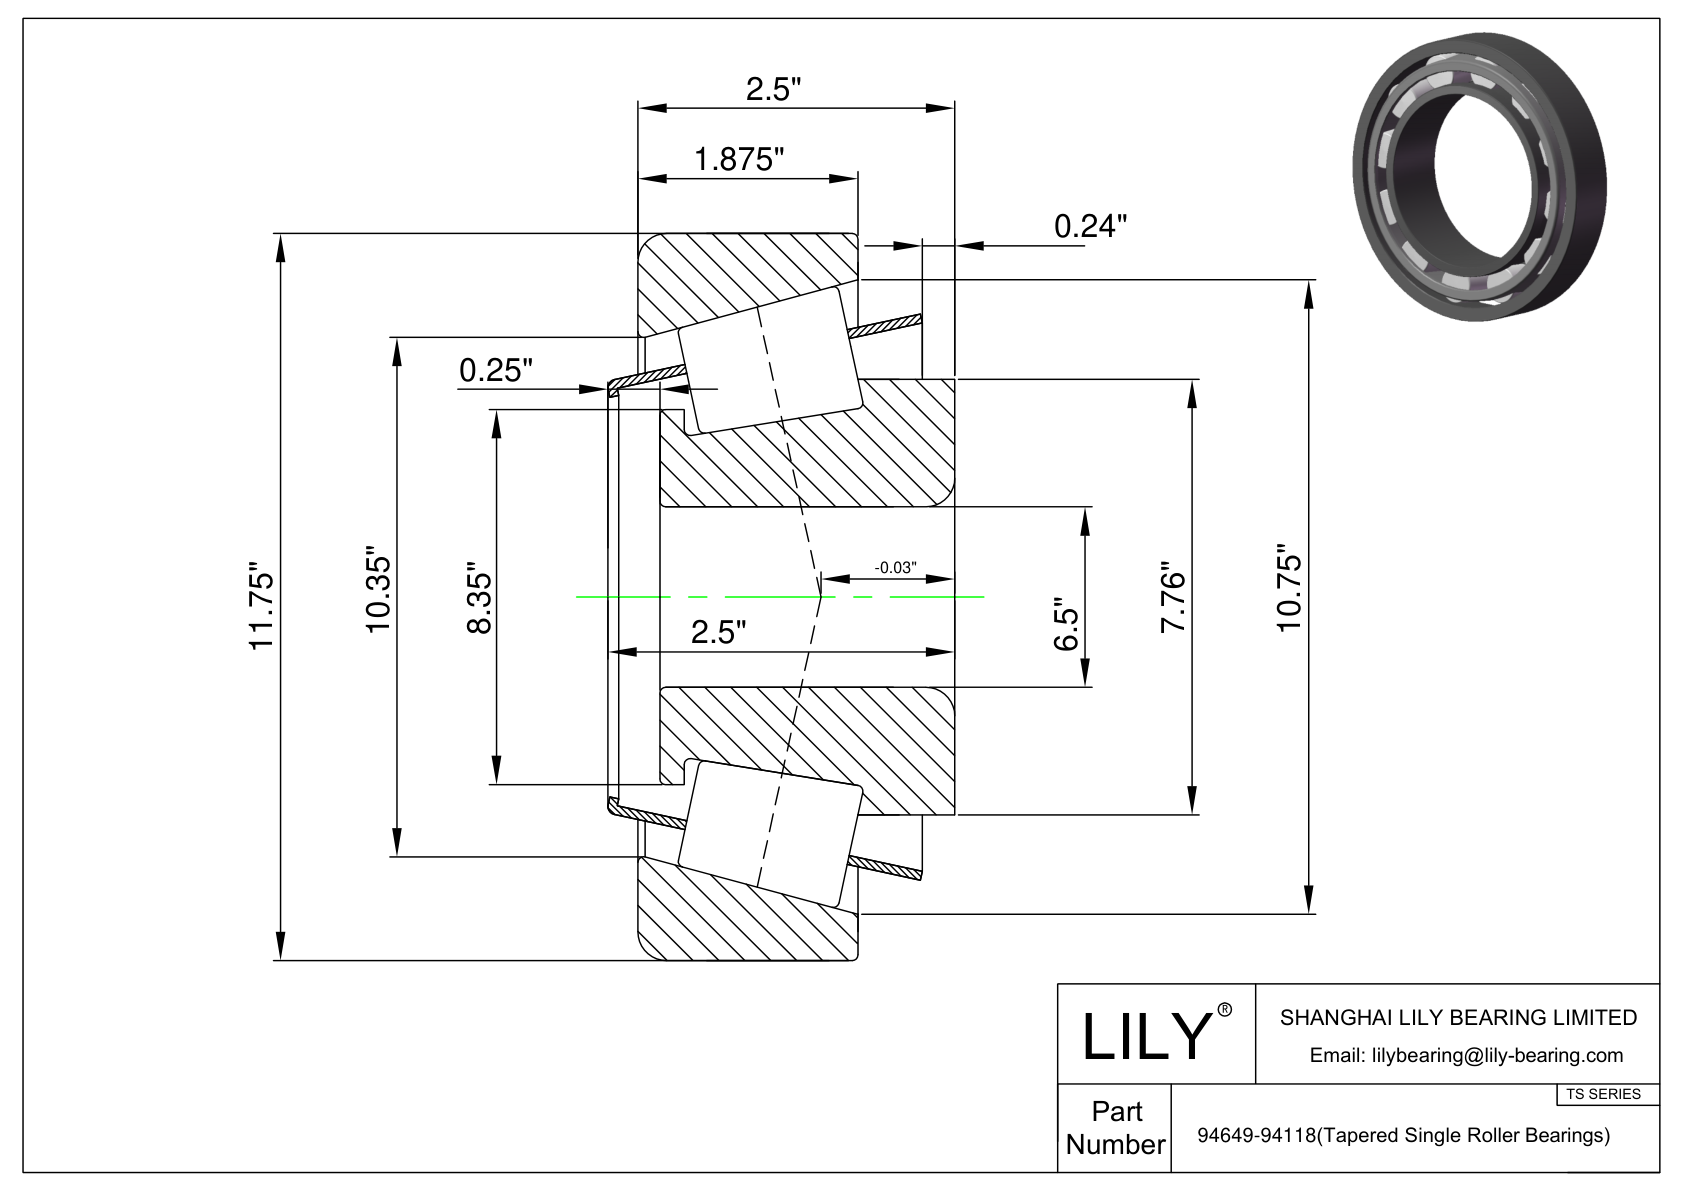 94649-94118 TS (Tapered Single Roller Bearings) (Imperial) cad drawing